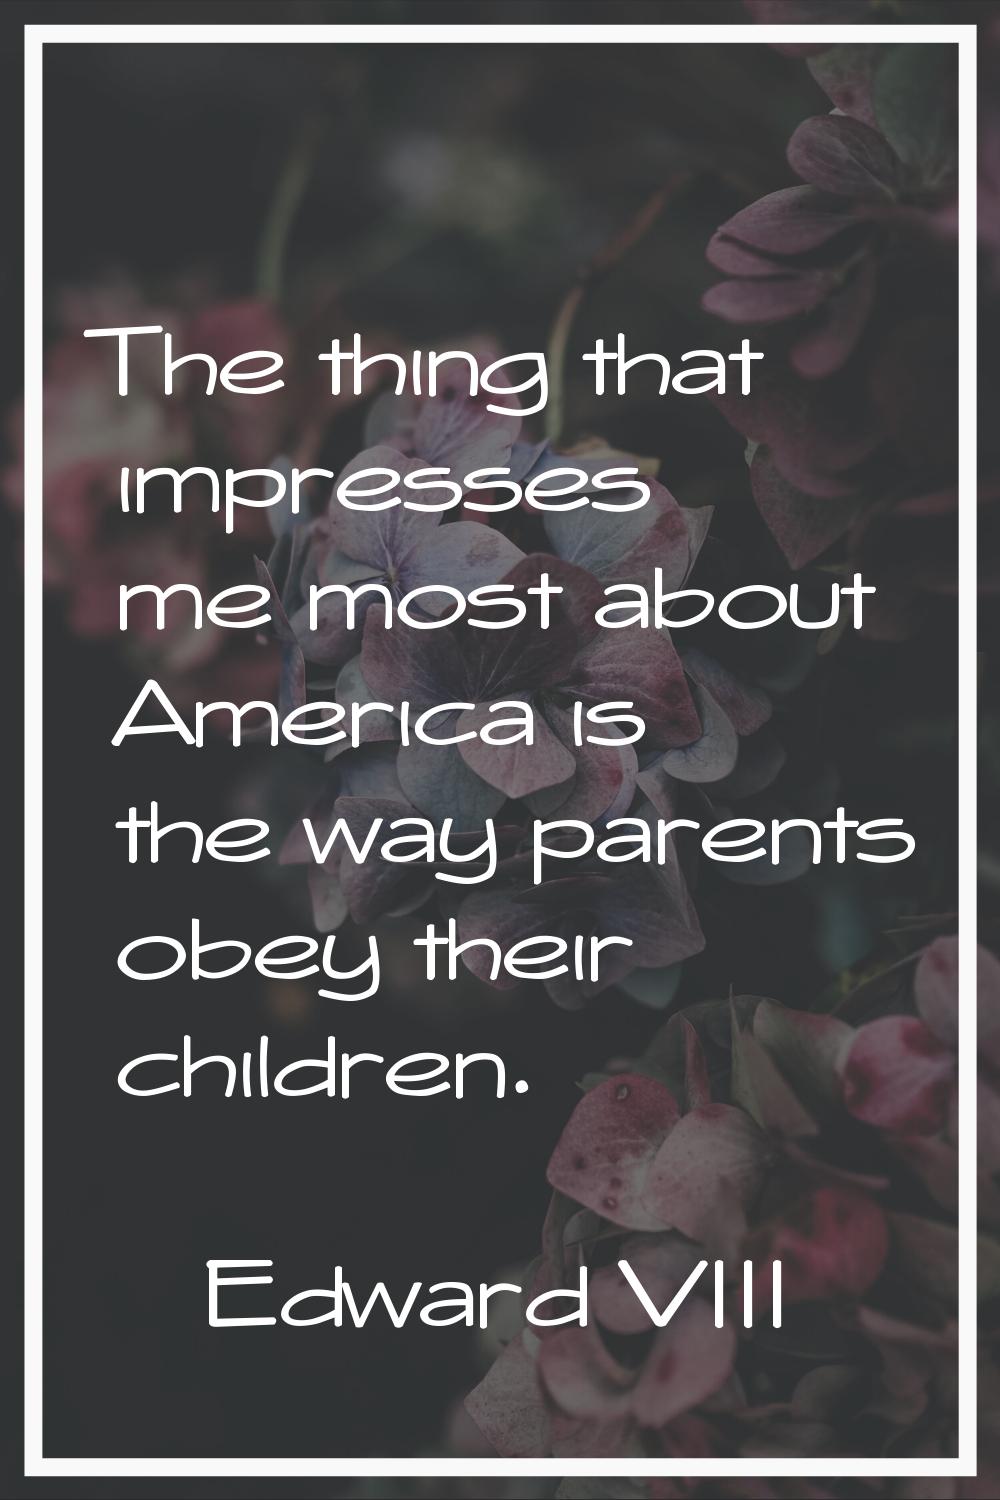 The thing that impresses me most about America is the way parents obey their children.